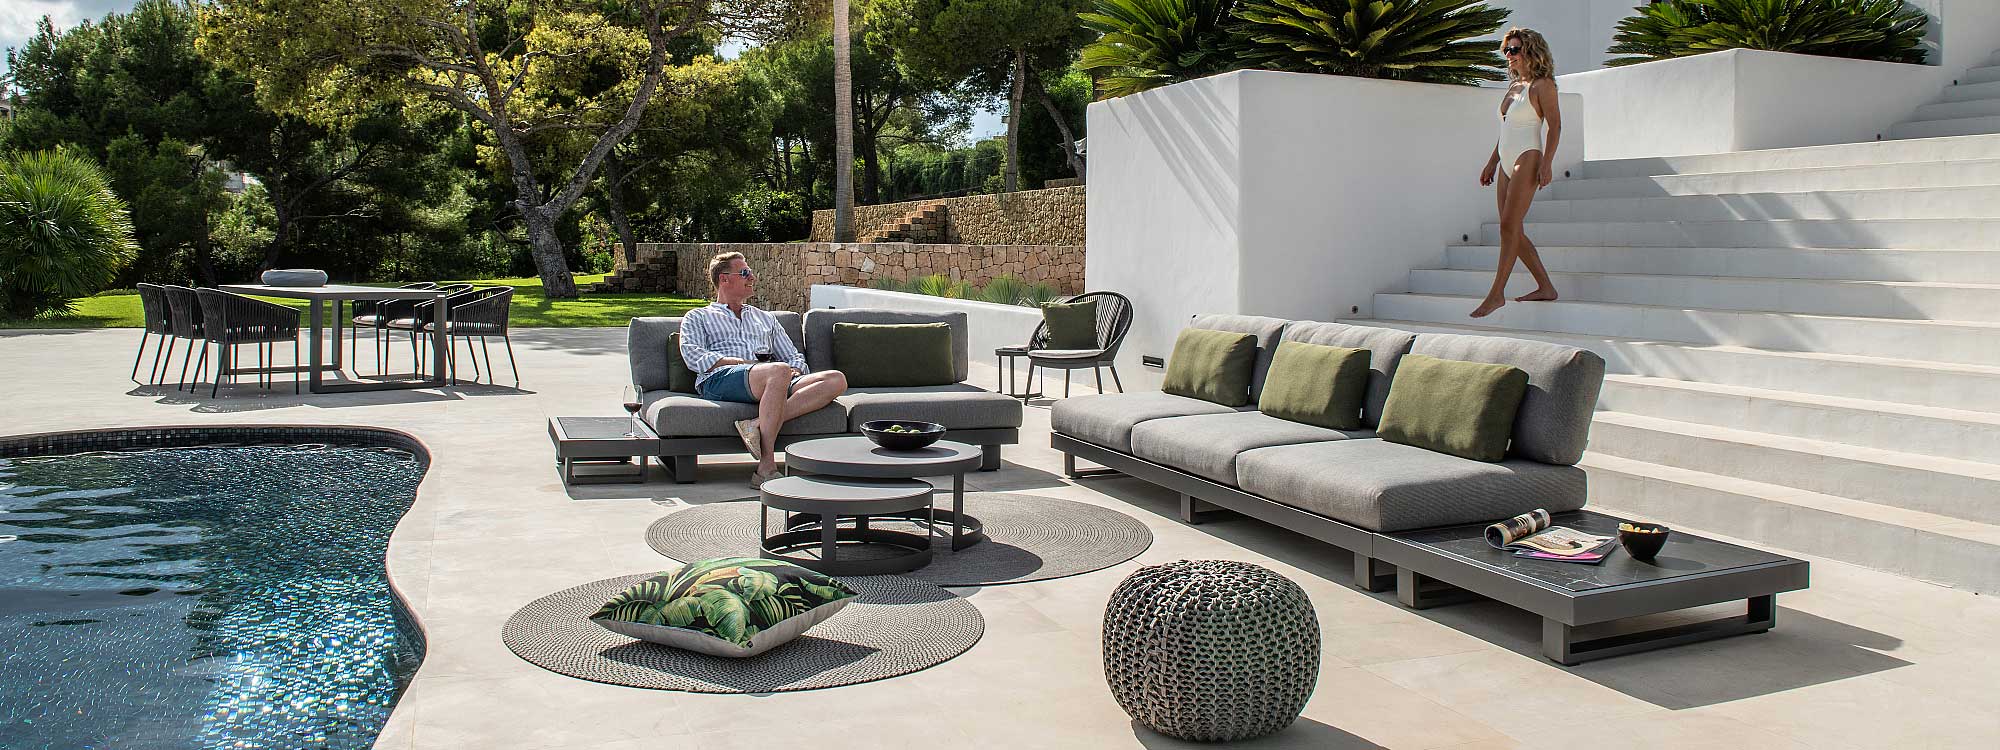 Image of Fano dark grey garden sofa with grey cushions and dark marble ceramic table tops on sunny poolside